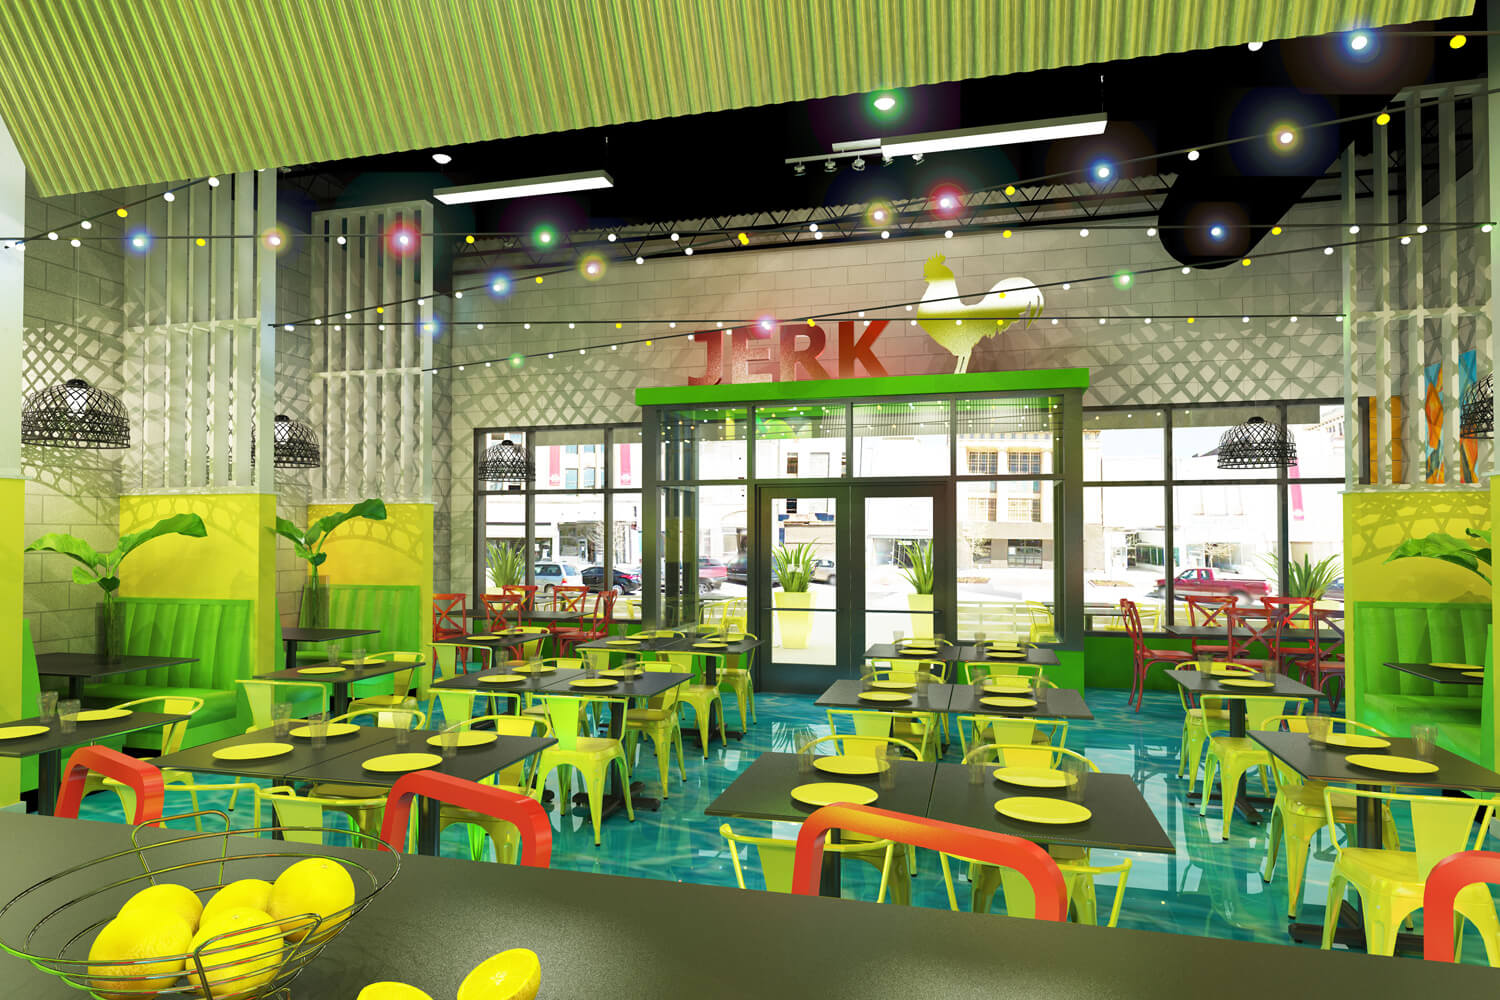 Island Delight Restaurant Designed by Foshee Architecture - Artist Depiction and Rendering of Interior of Seating Area